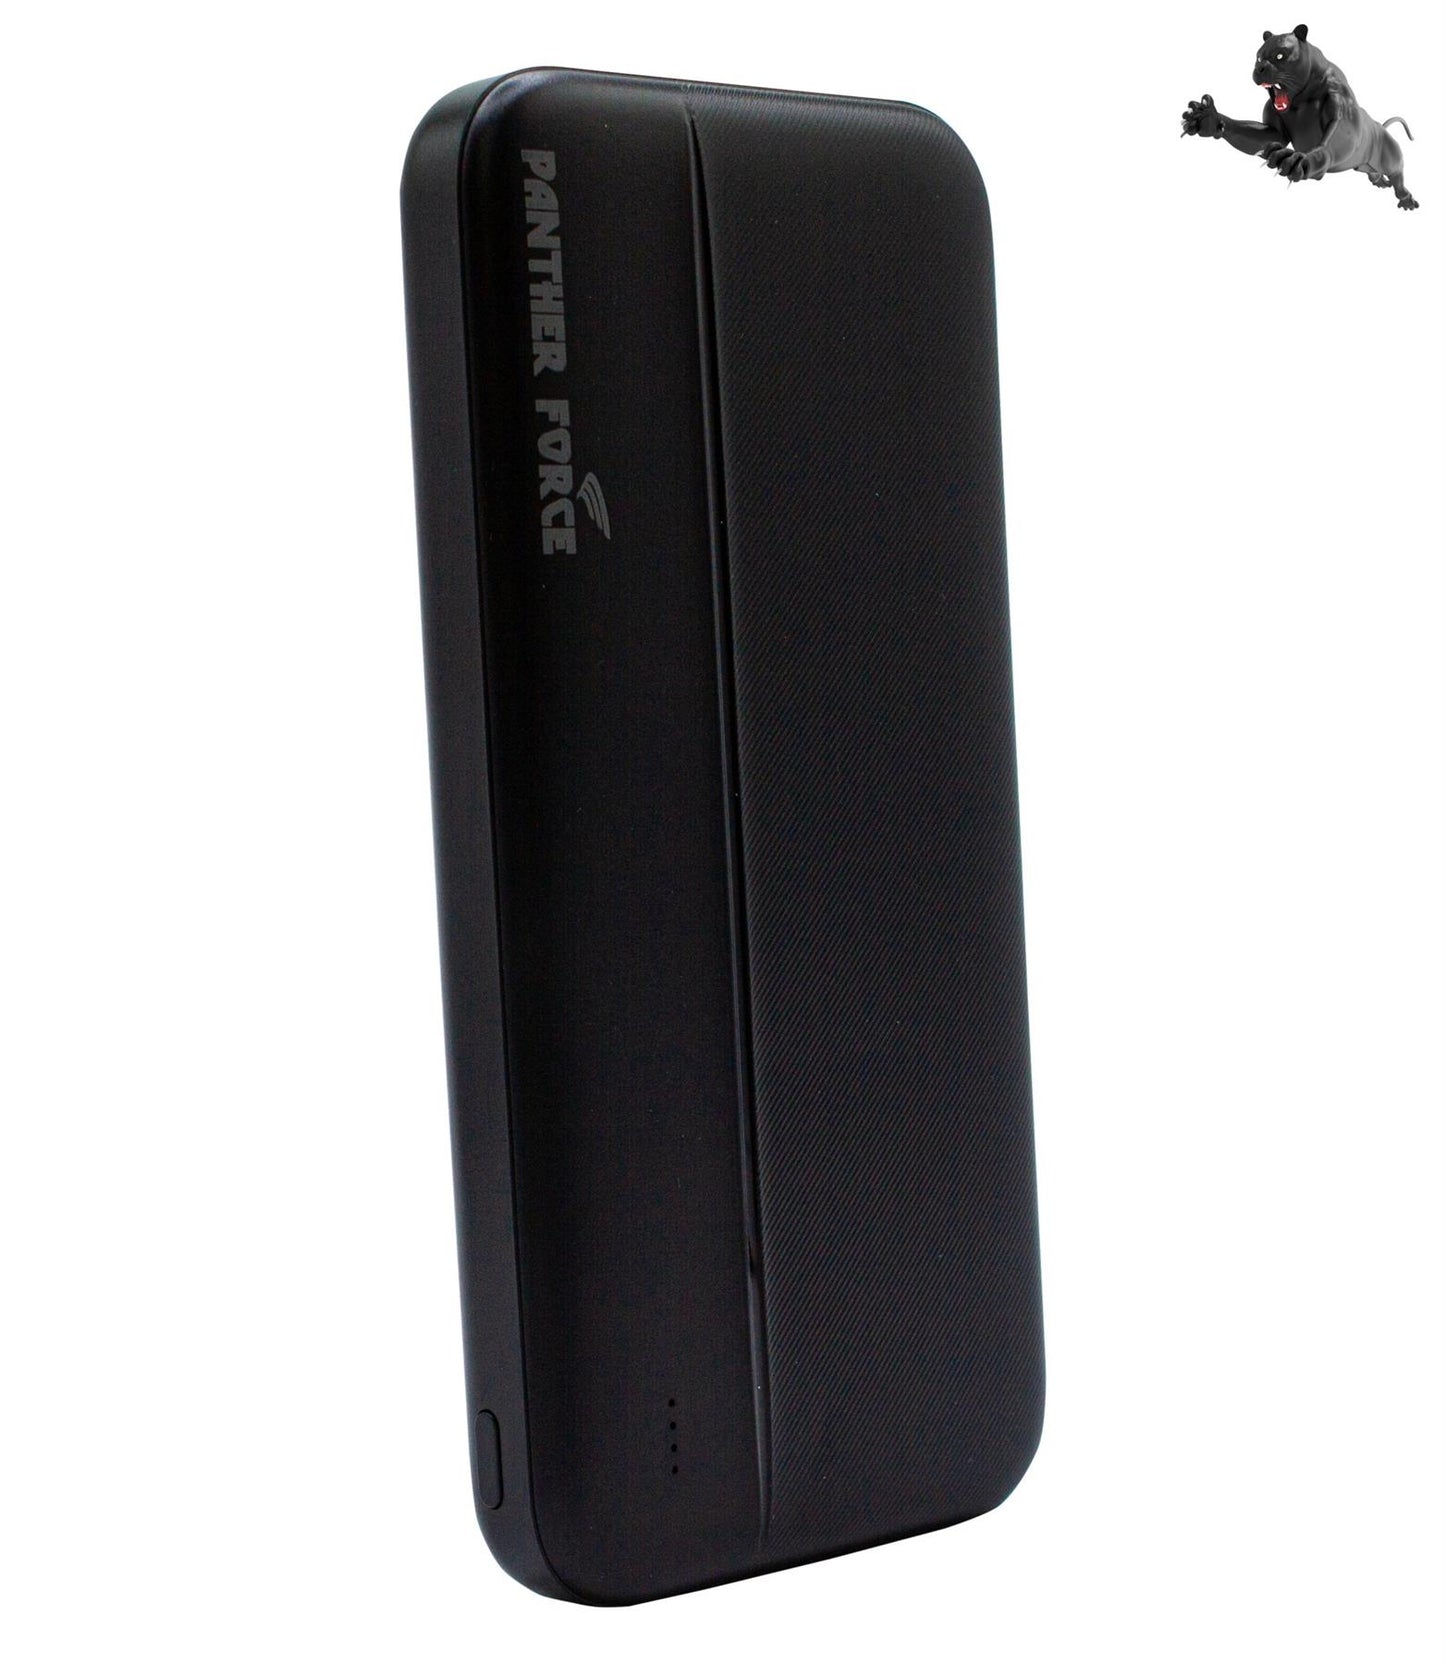 Panther Force Power Bank 10000mAh P.D3.0 Quick charge 3.0